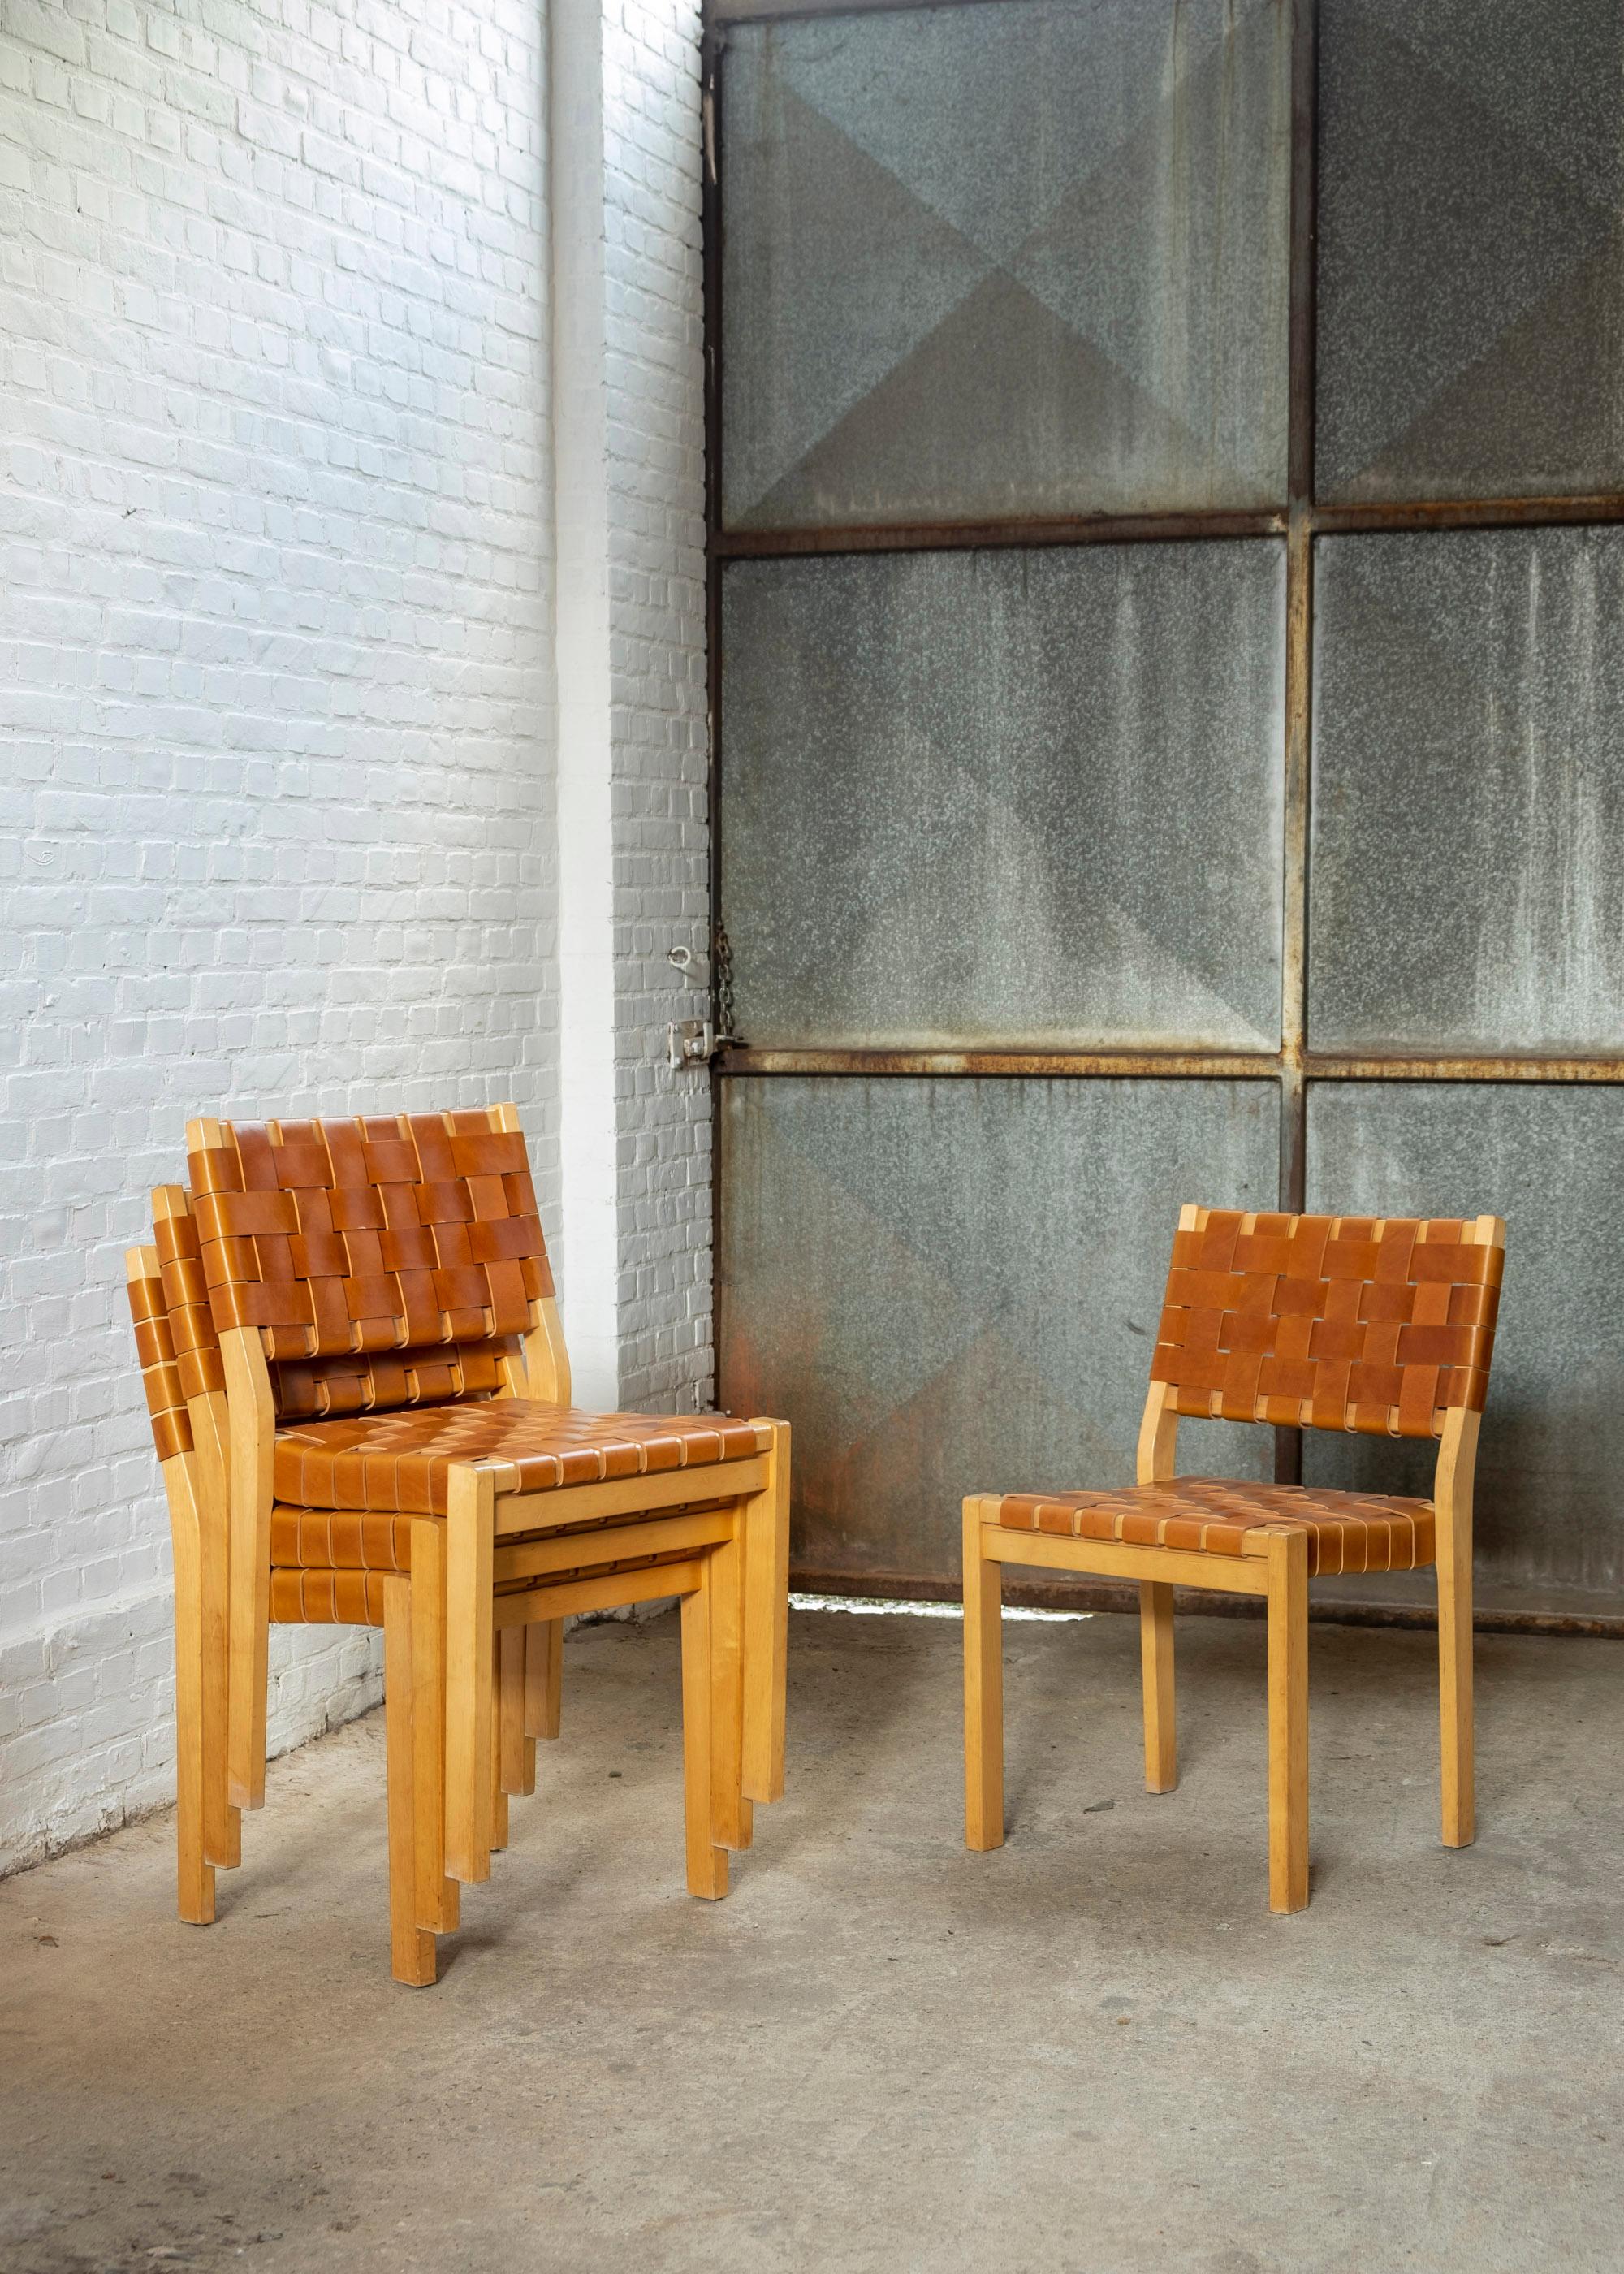 Set of 4 Alvar Aalto chairs Model 611, birch wood frame reupholstered with high quality saddle leather straps in cognac color, produced by Artek in the 1970s. The 611 chair was designed by Alvar Aalto in 1929, one of the first pieces of furniture